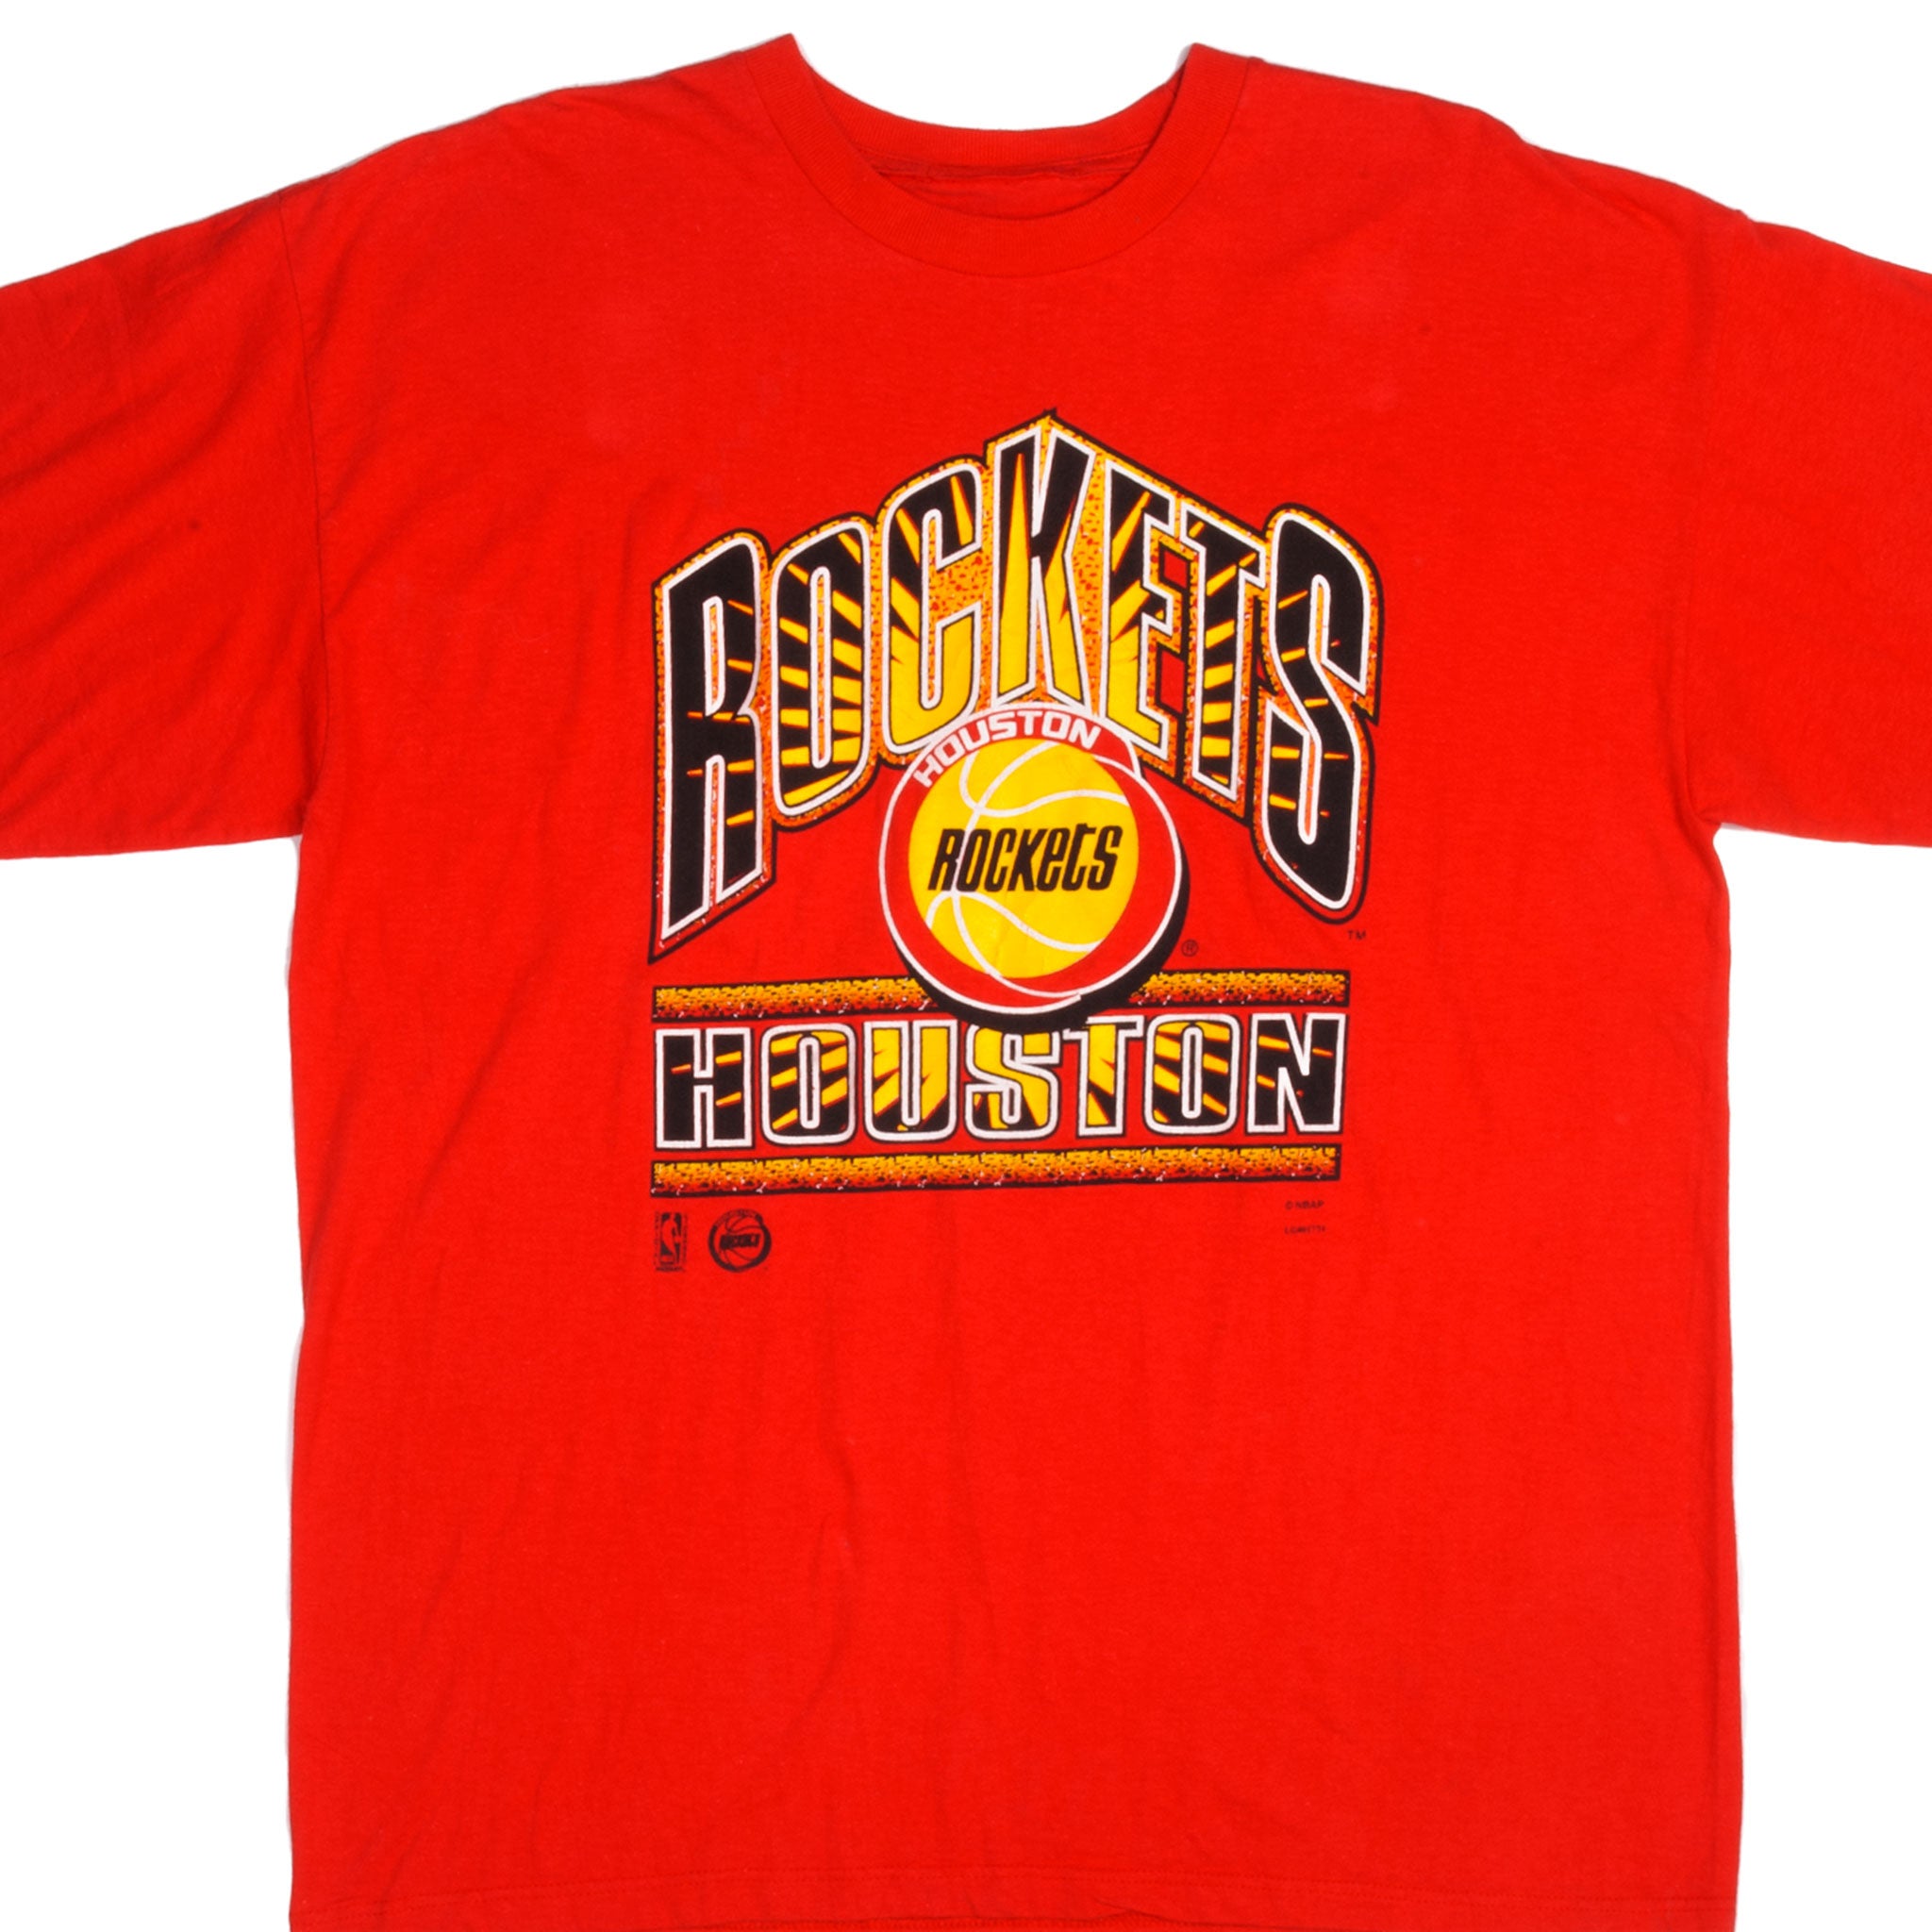 Vintage Houston Rockets T-shirt 90s NBA Basketball – For All To Envy